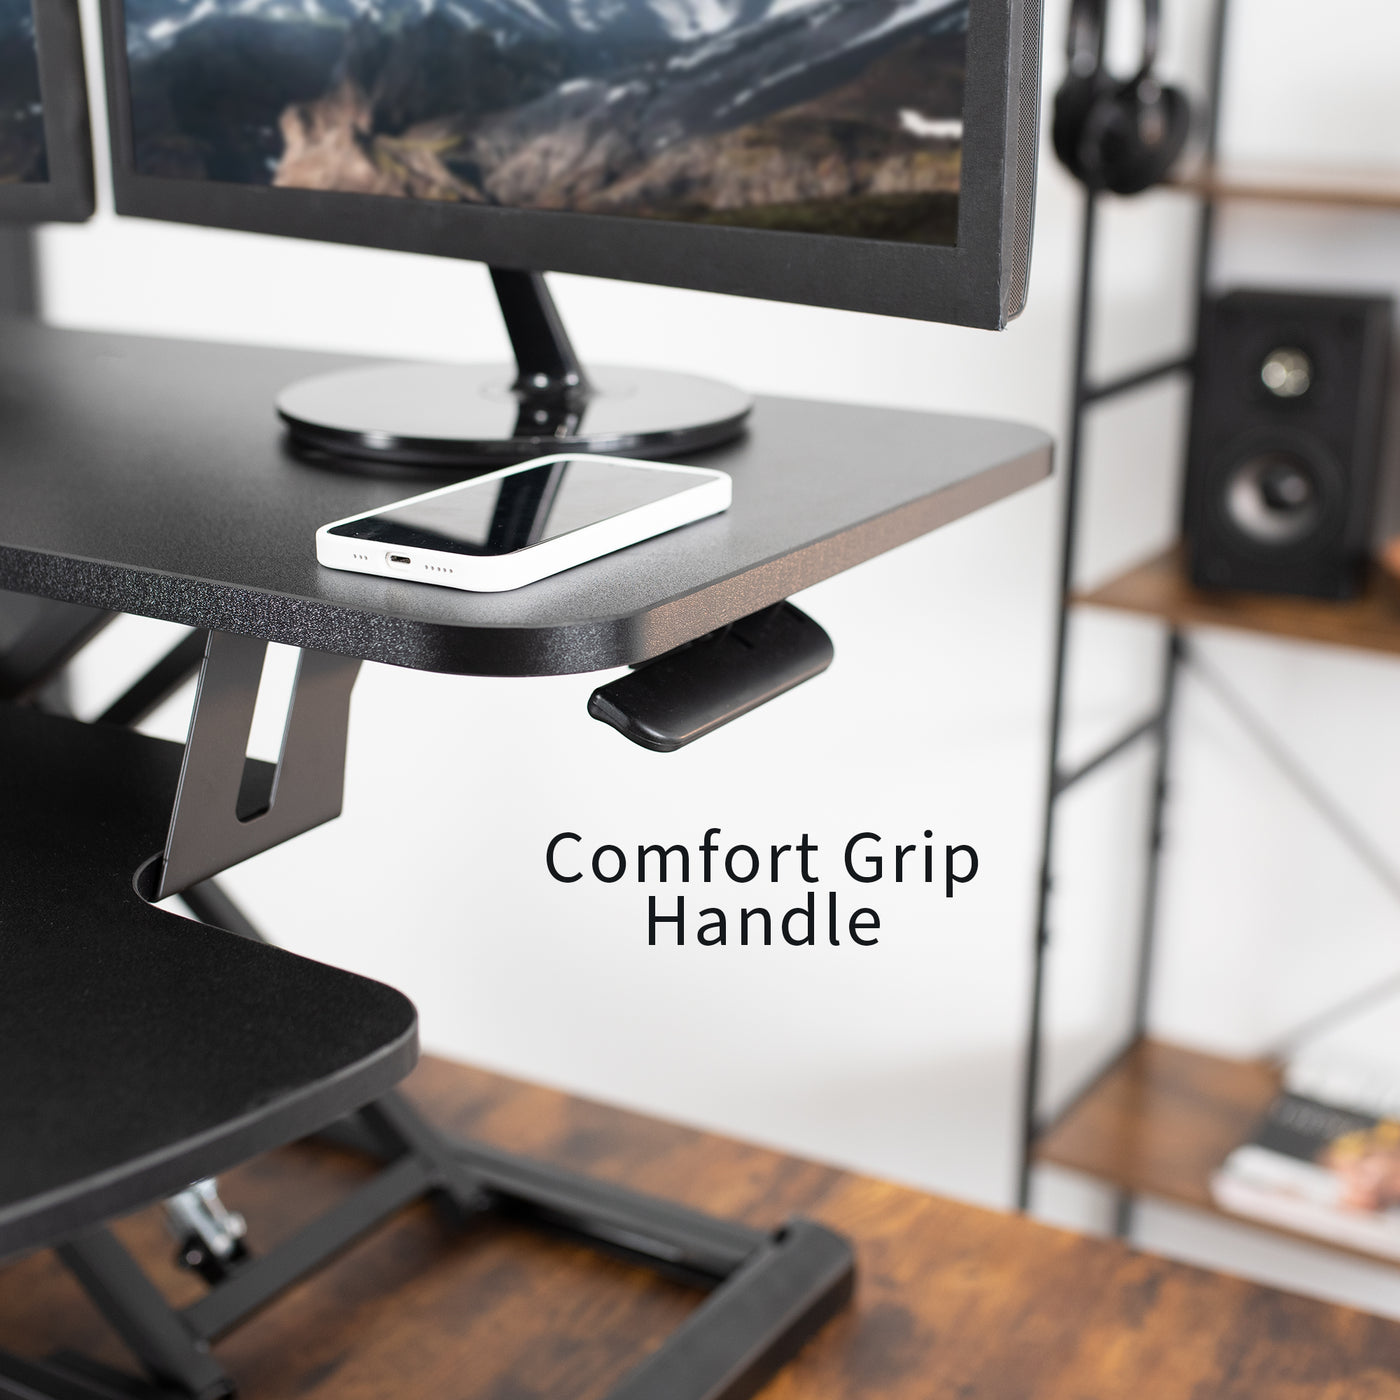 Comfort grip lever to raise and lower the desk converter.